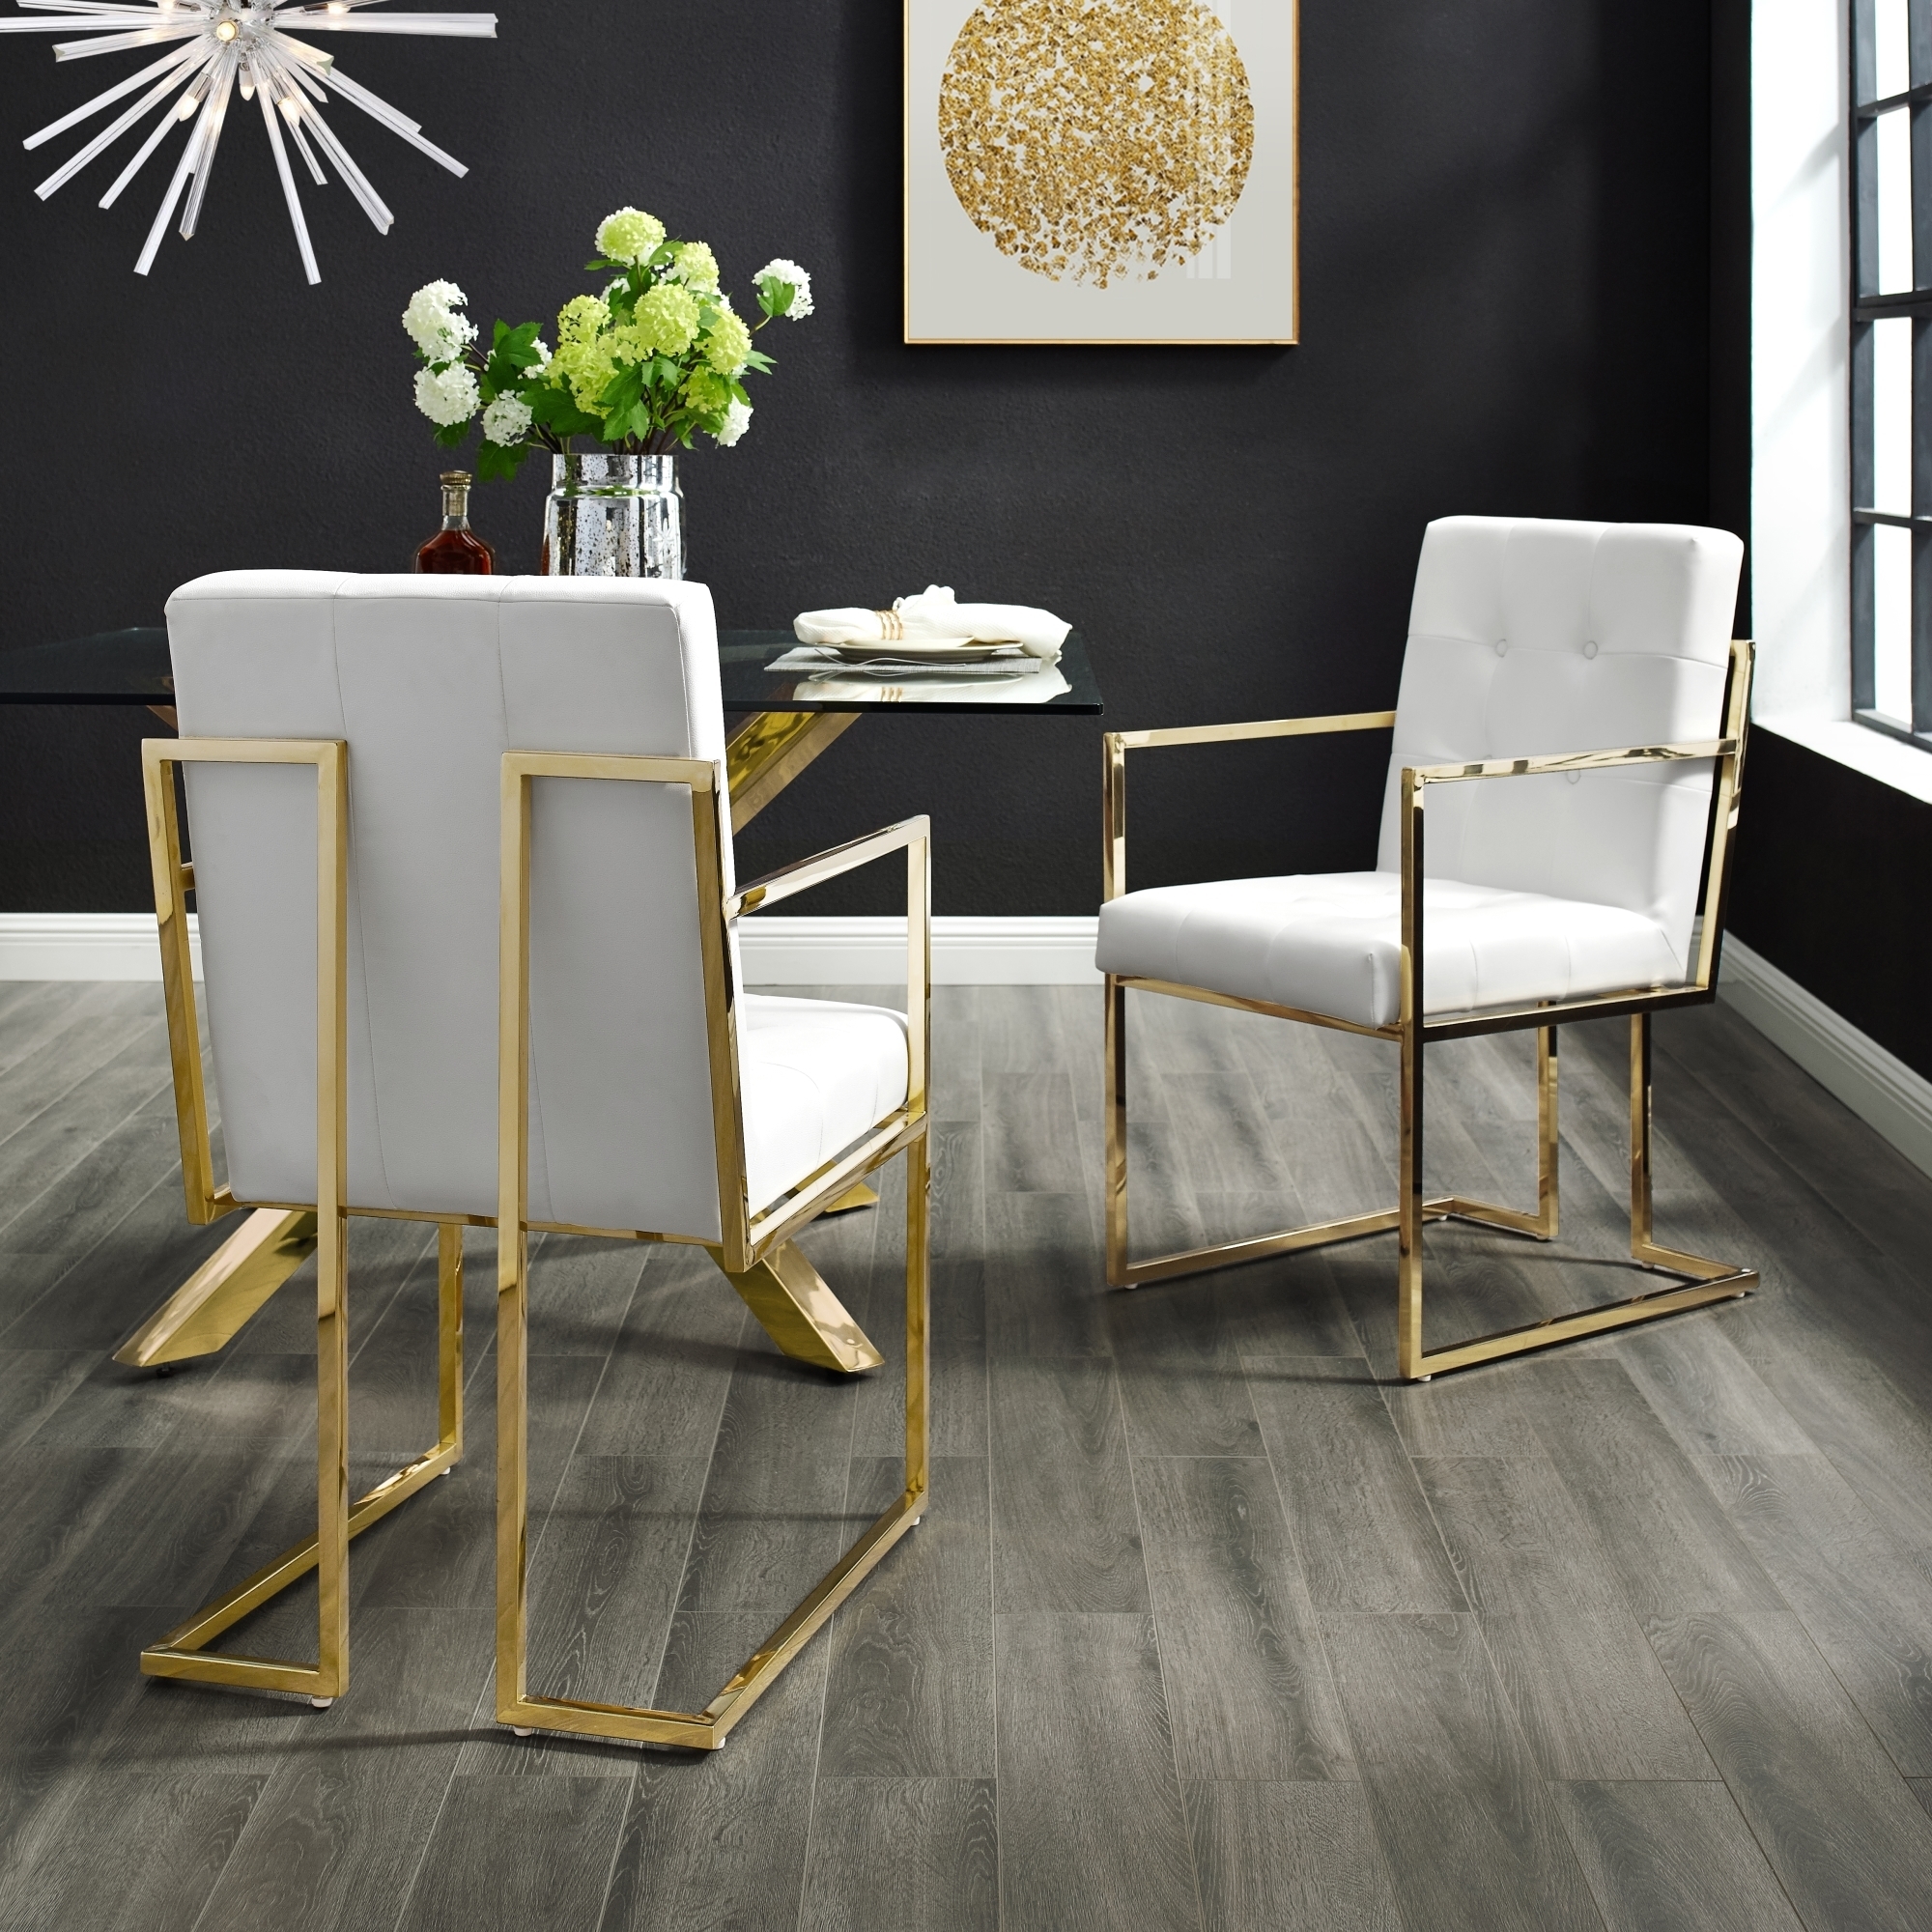 Cecille PU Leather Or Velvet Dining Chair-Set Of 2-Chrome-Gold Frame-Square Arm-Button Tufted-Modern & Functional By Inspired Home - Light G